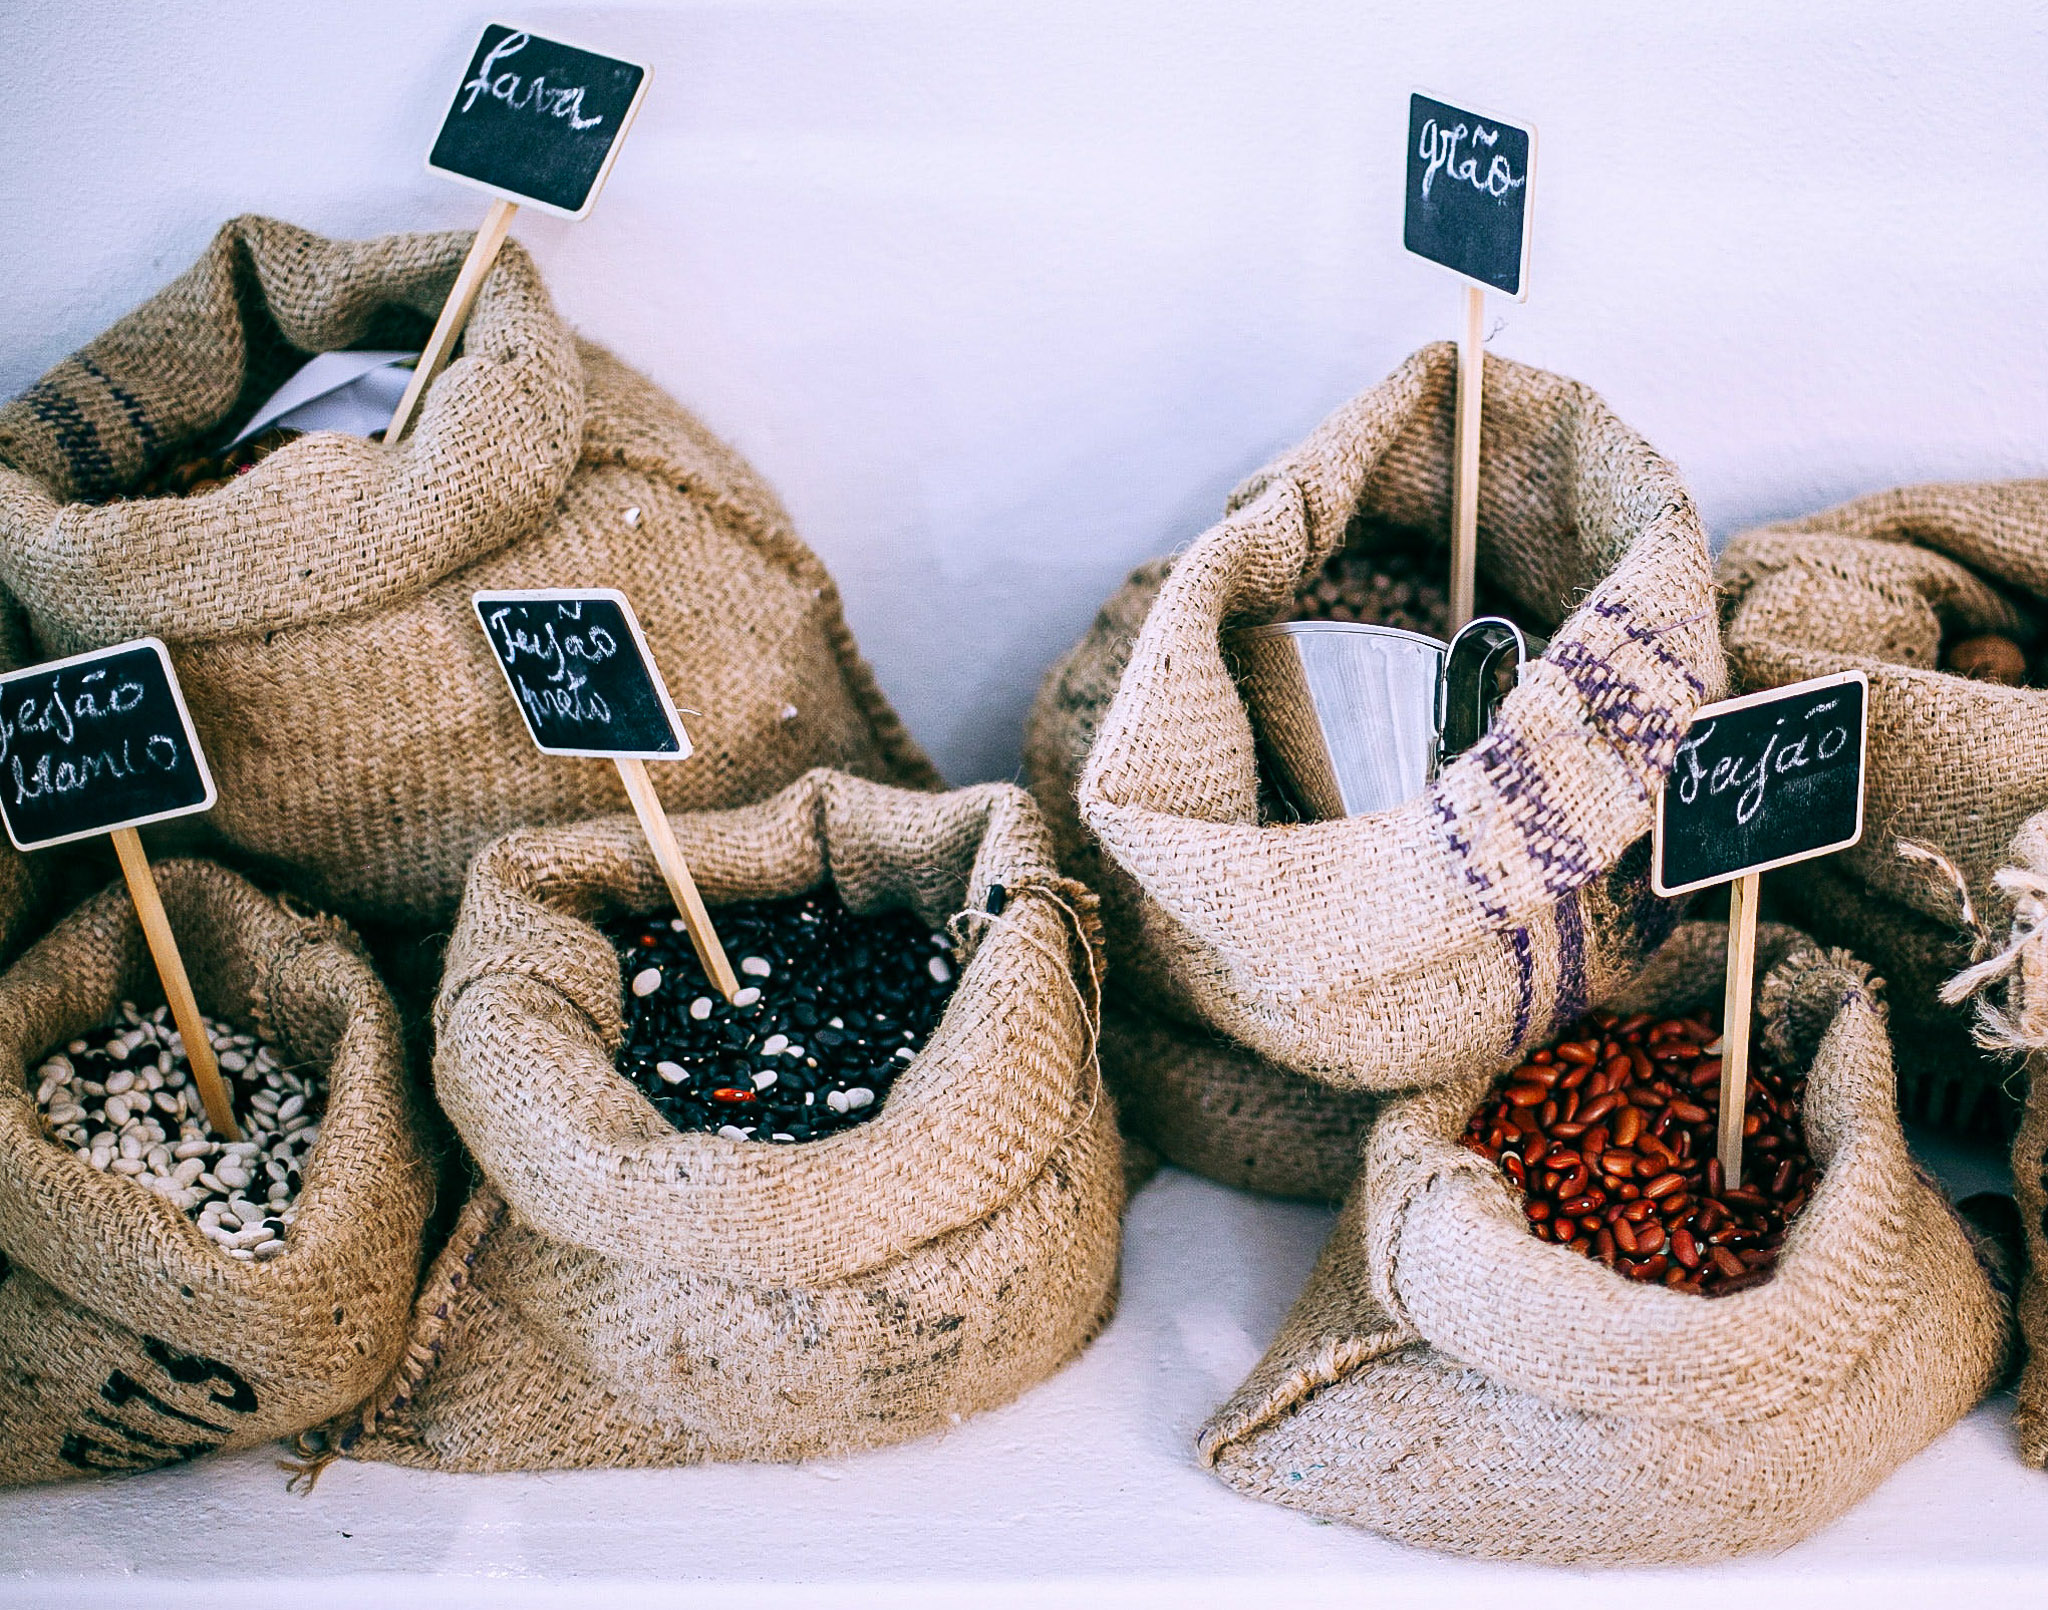 alt="five burlap bags with five different types of dried beans."